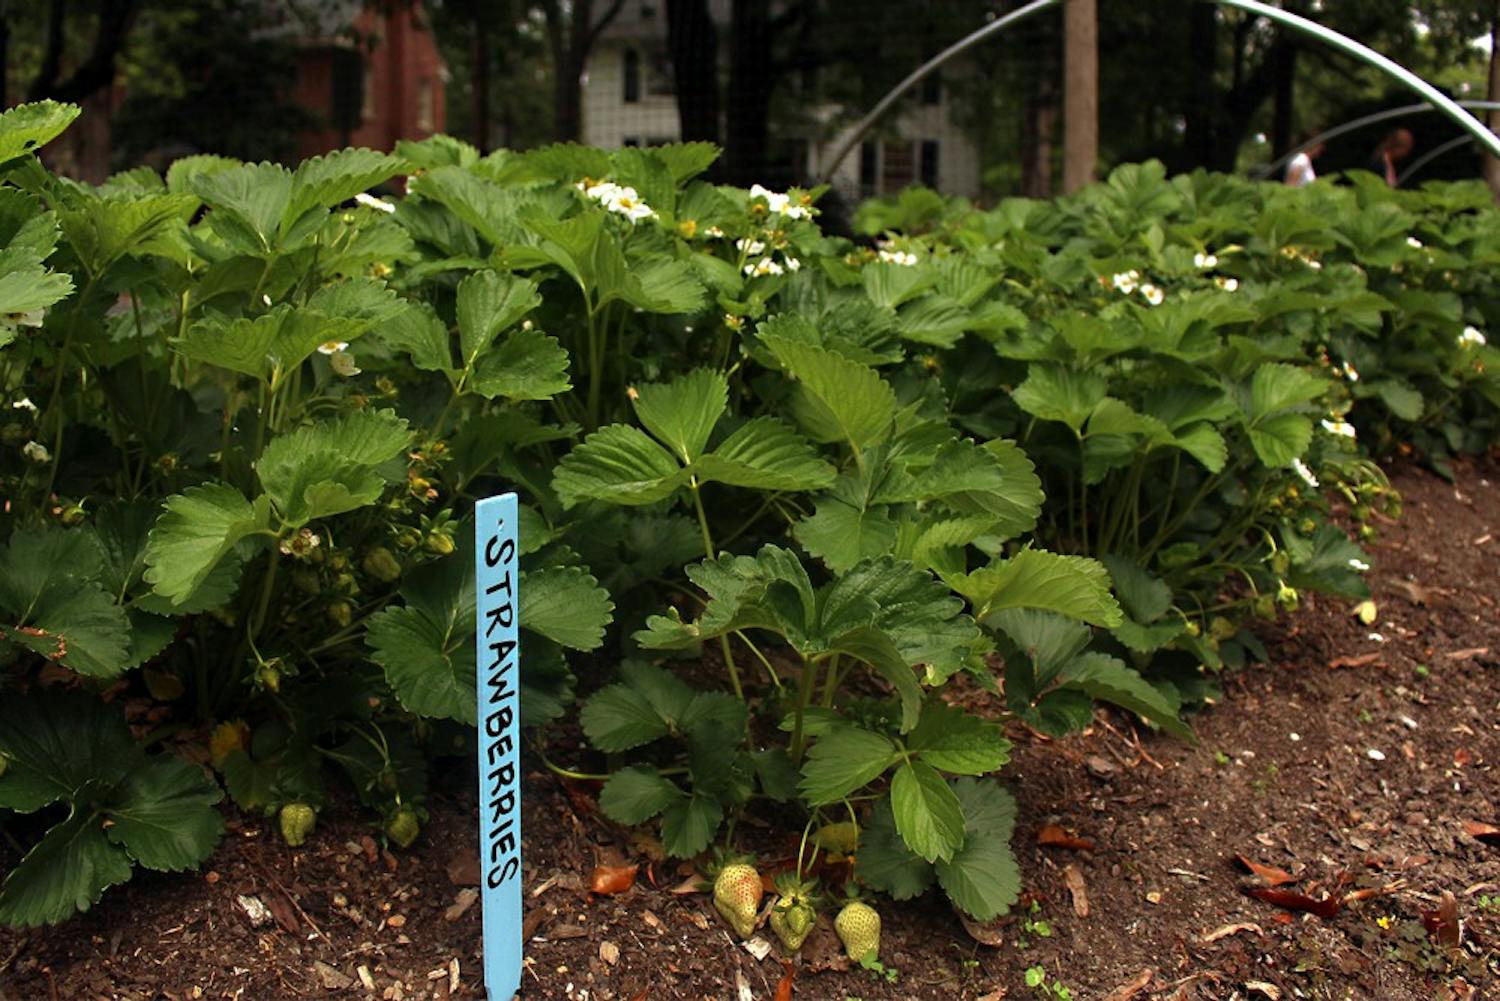 Carolina Campus Community Gardens is one of several gardens being featured in this years Chapel Hill Garden Tour. 